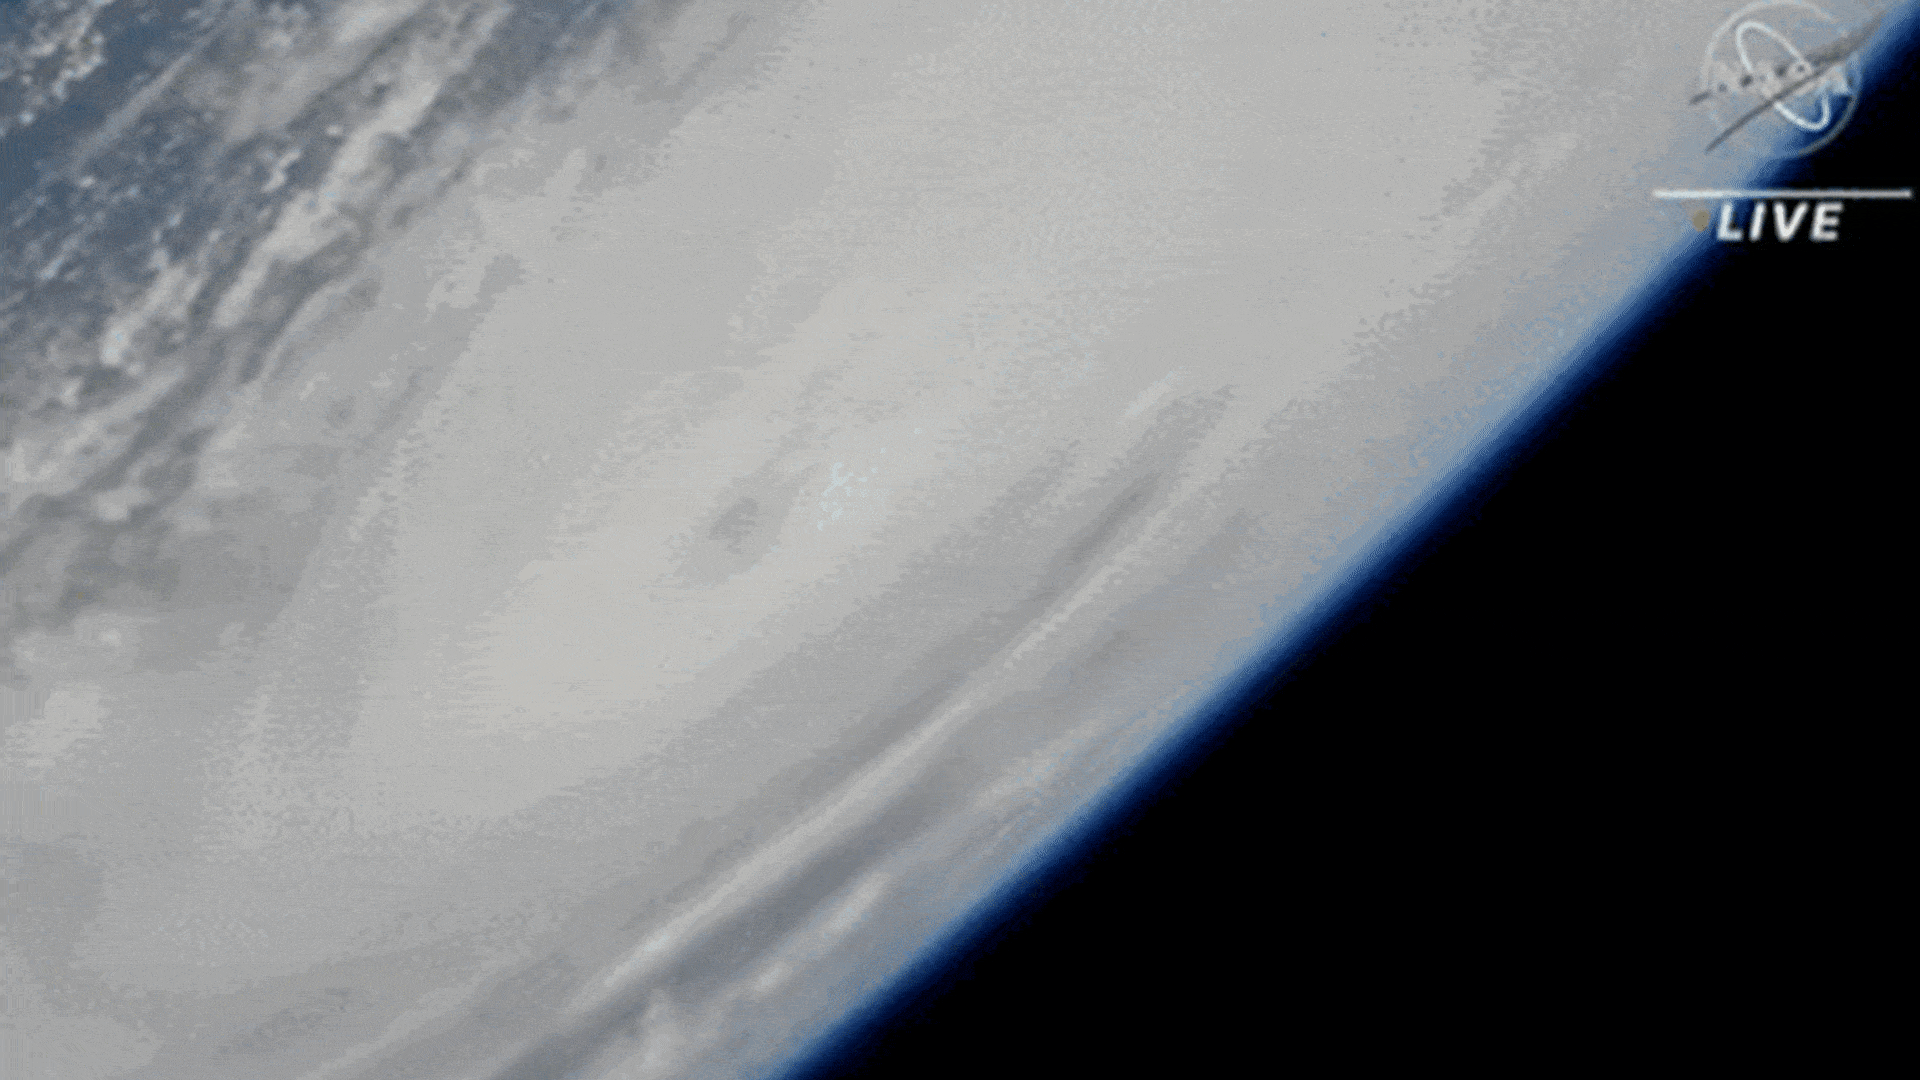 The view of Hurricane Ian from cameras on the International Space Station, as the orbiting research laboratory passed near the storm around 3 p.m. ET on Sept. 28, 2022.